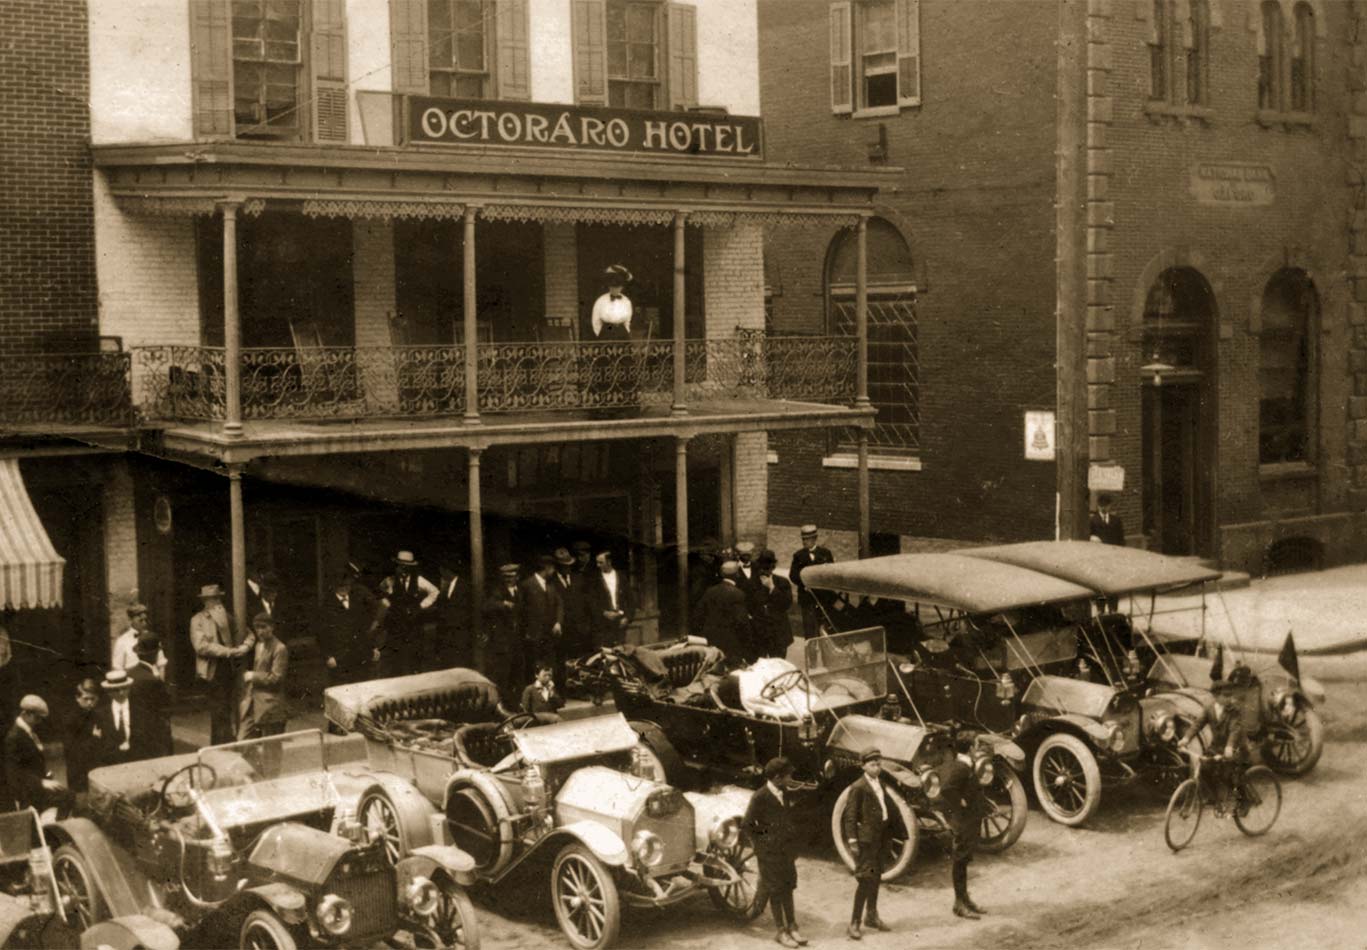 Early automobiles lined up on Third Street in front of the Octorara Hotel around 1915.